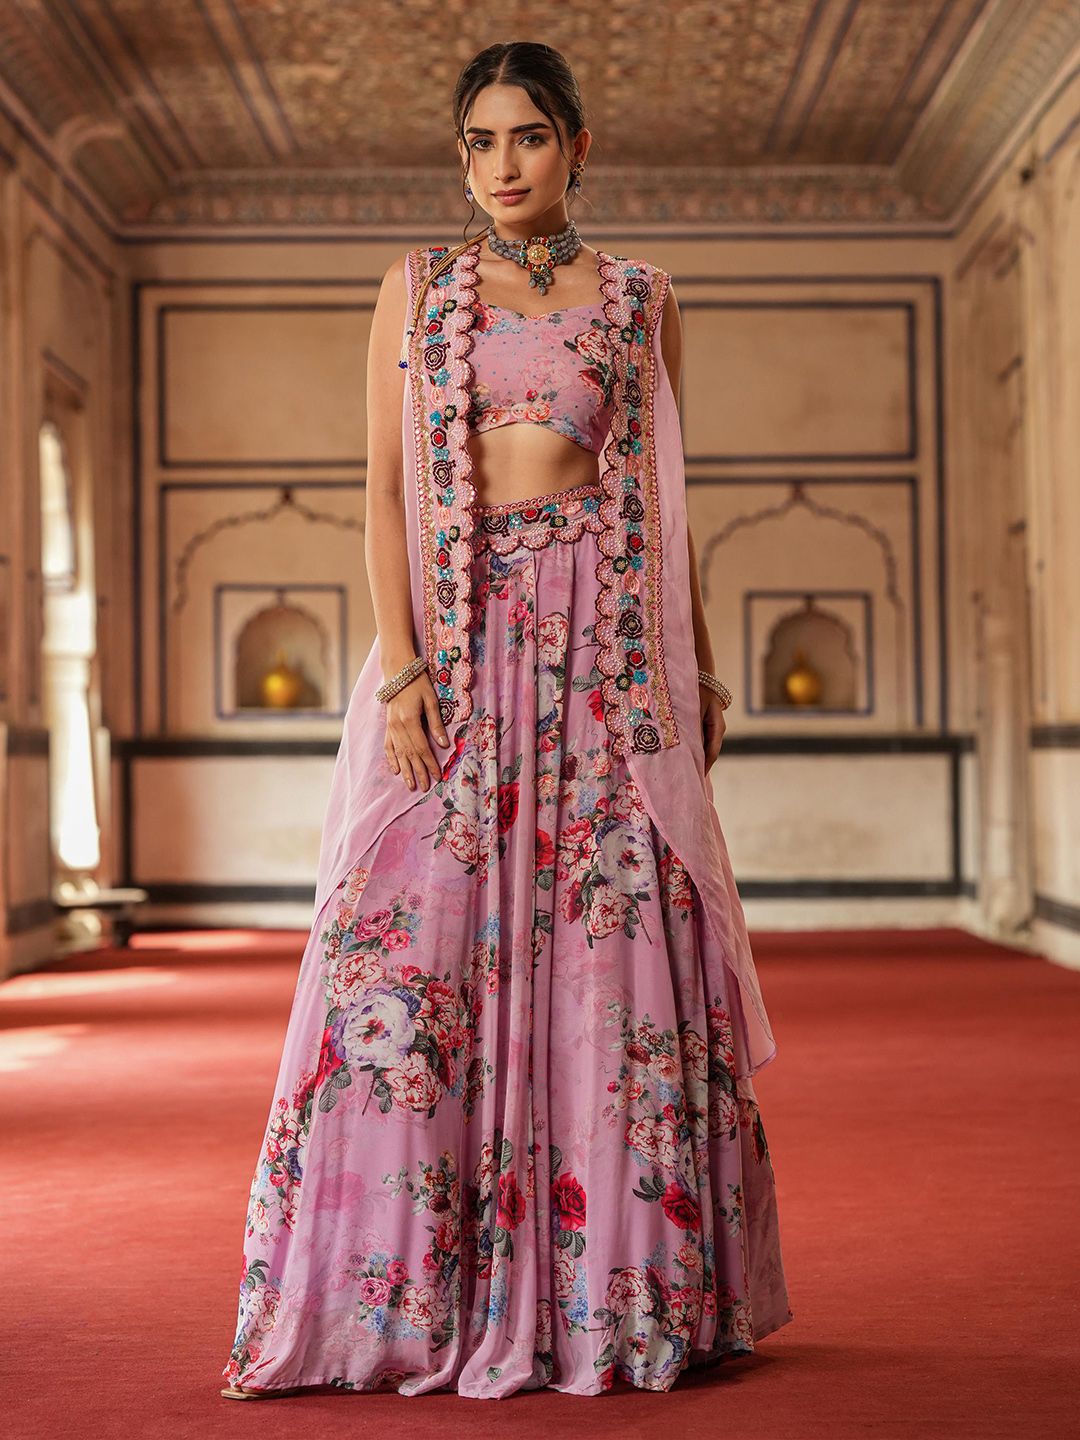 SCAKHI Floral Printed Ready To Wear Lehenga Choli Price in India